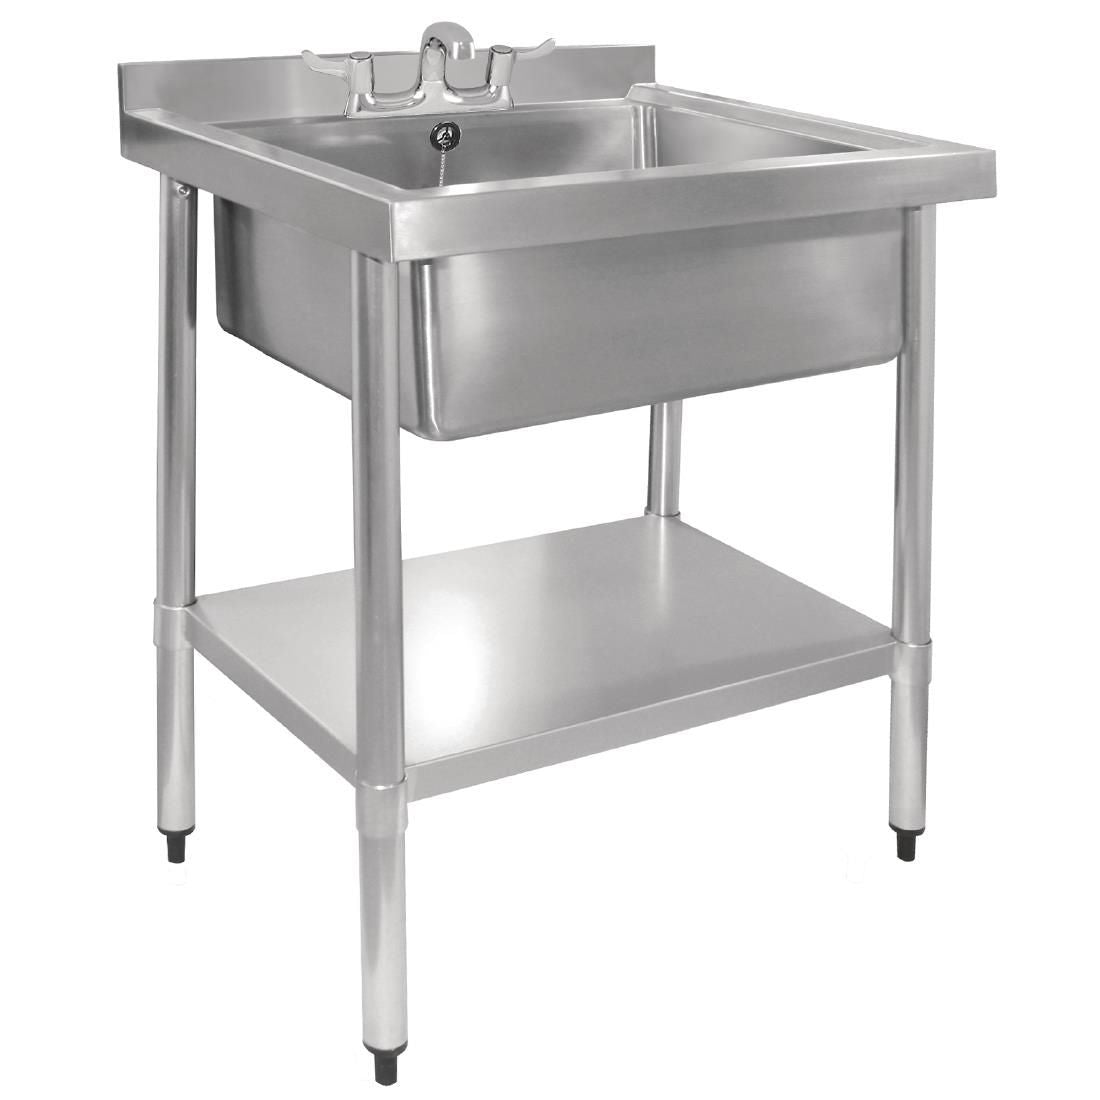 GJ537 Vogue Stainless Steel Midi Pot Wash Sink with Undershelf JD Catering Equipment Solutions Ltd